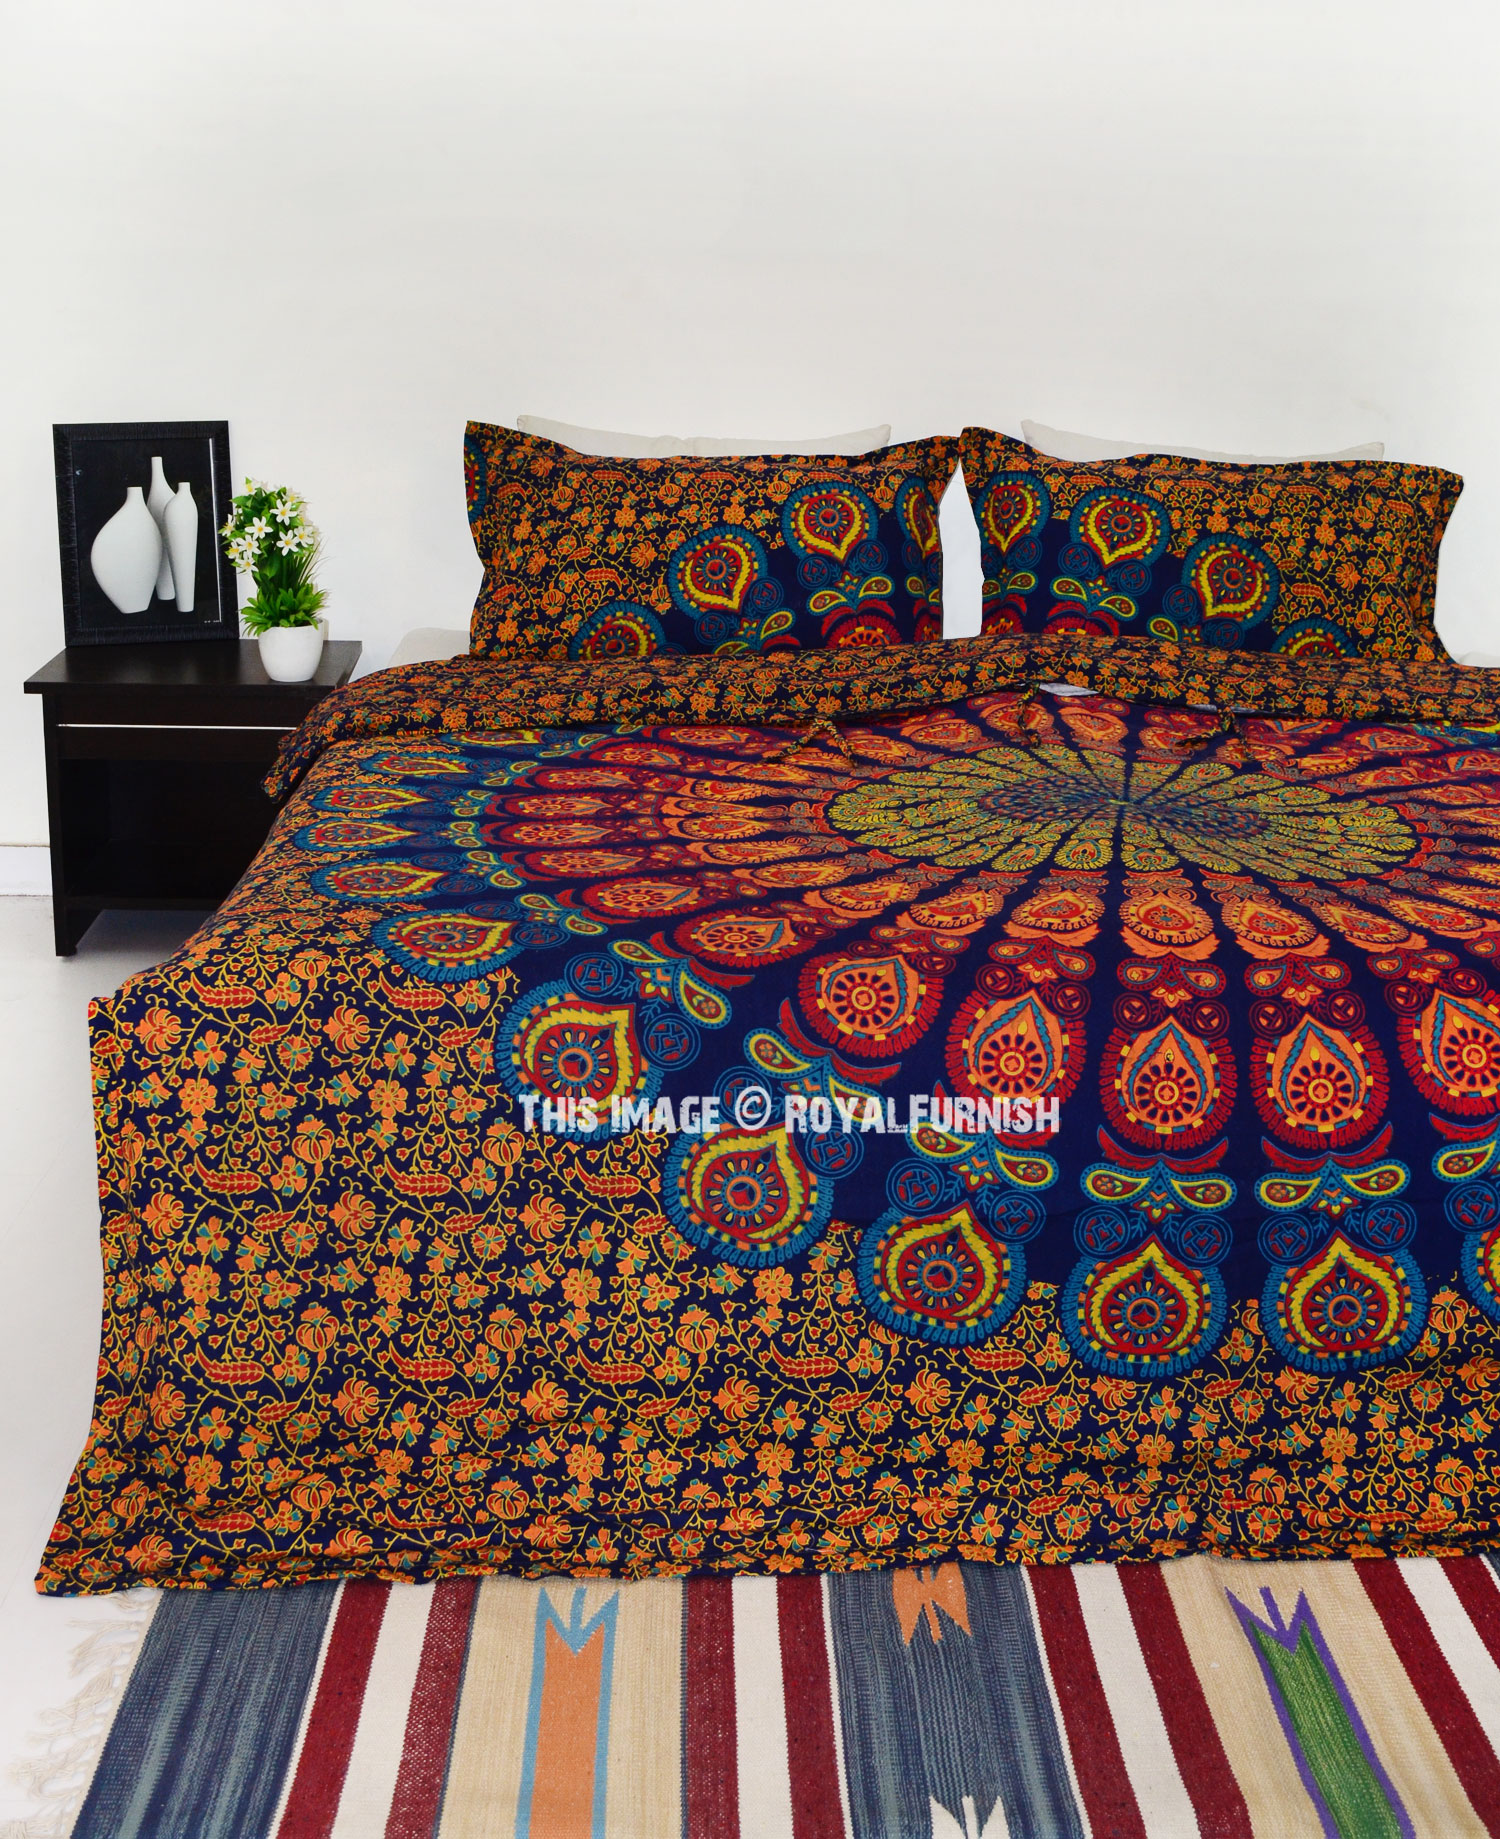 BlessLiving Yellow Mandala Medallion Bedding Duvet Cover 3 Pieces Kaleidoscopic Flower Bed Cover Bedspread Boho Chic Comforter Cover Twin